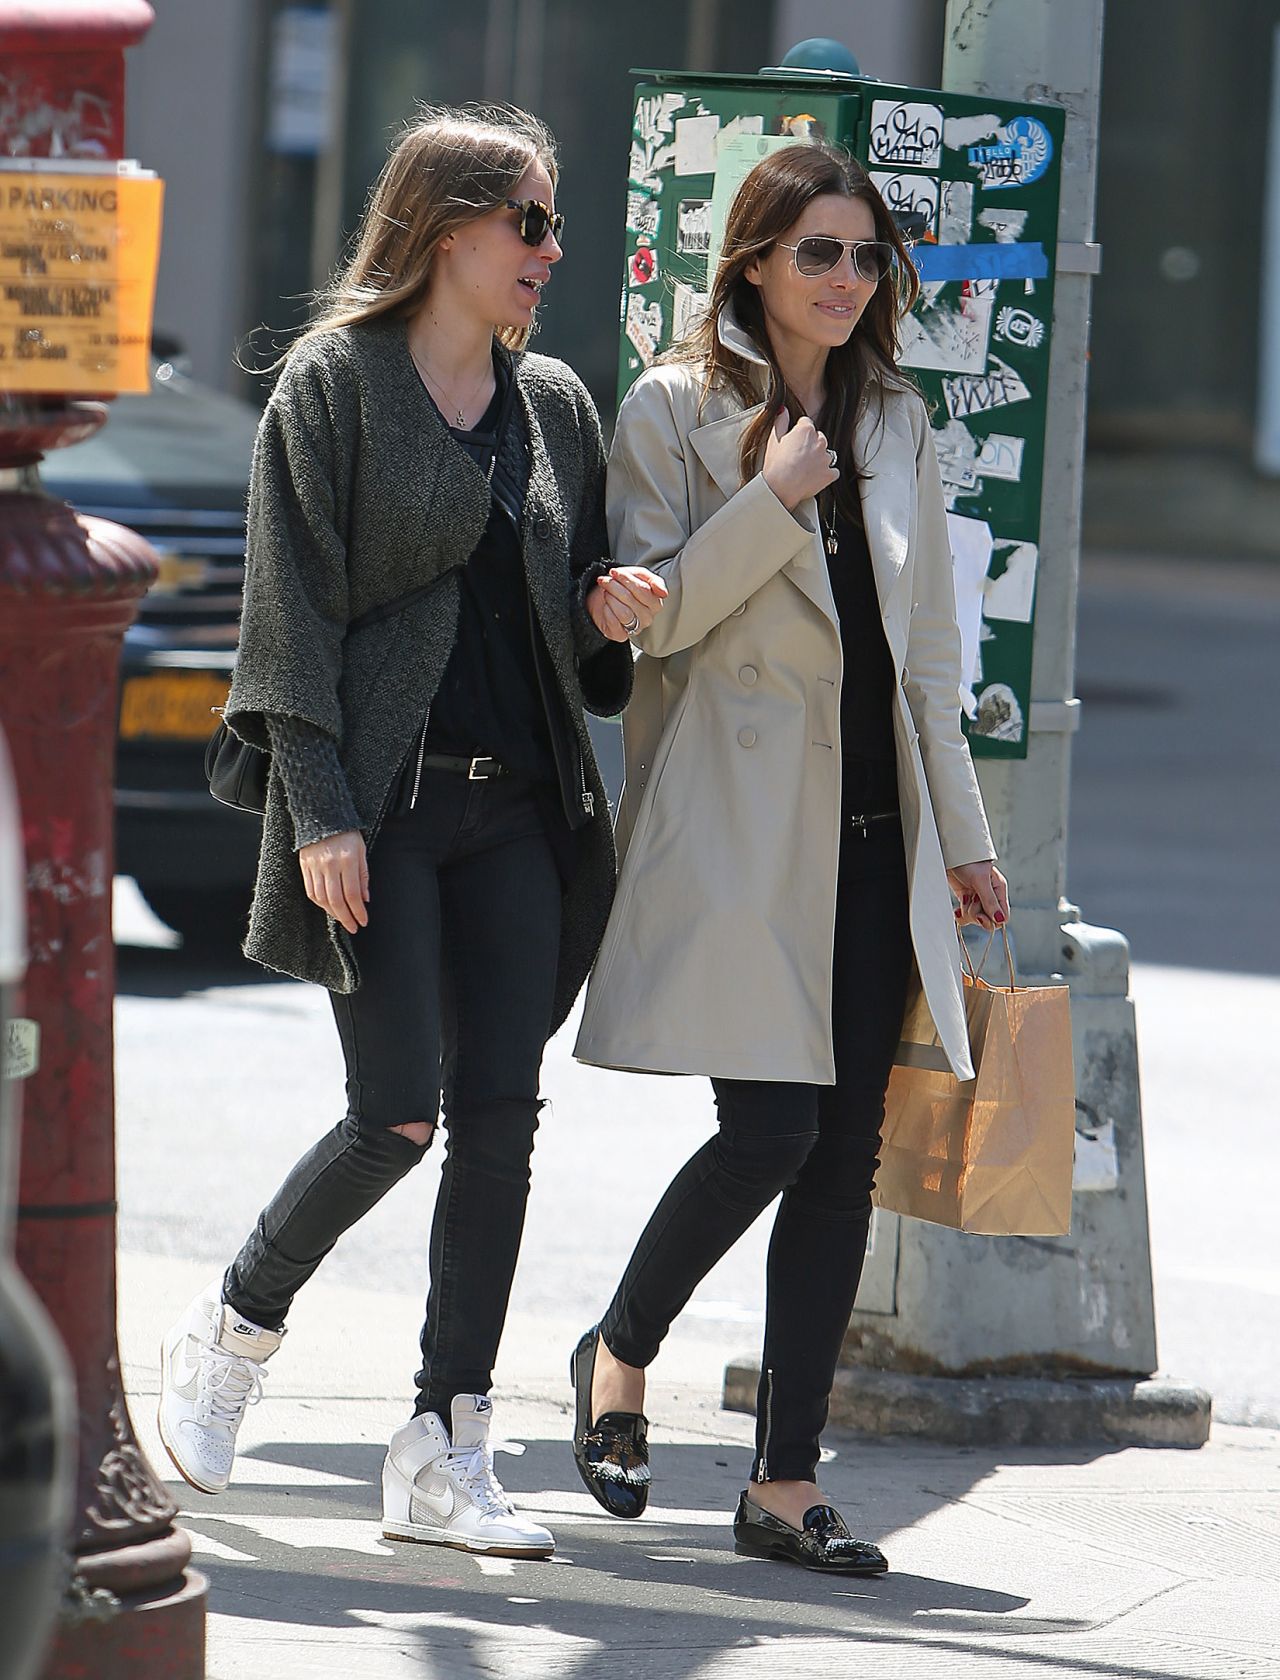 Jessica Biel Casual Style - Out in NYC - April 2014